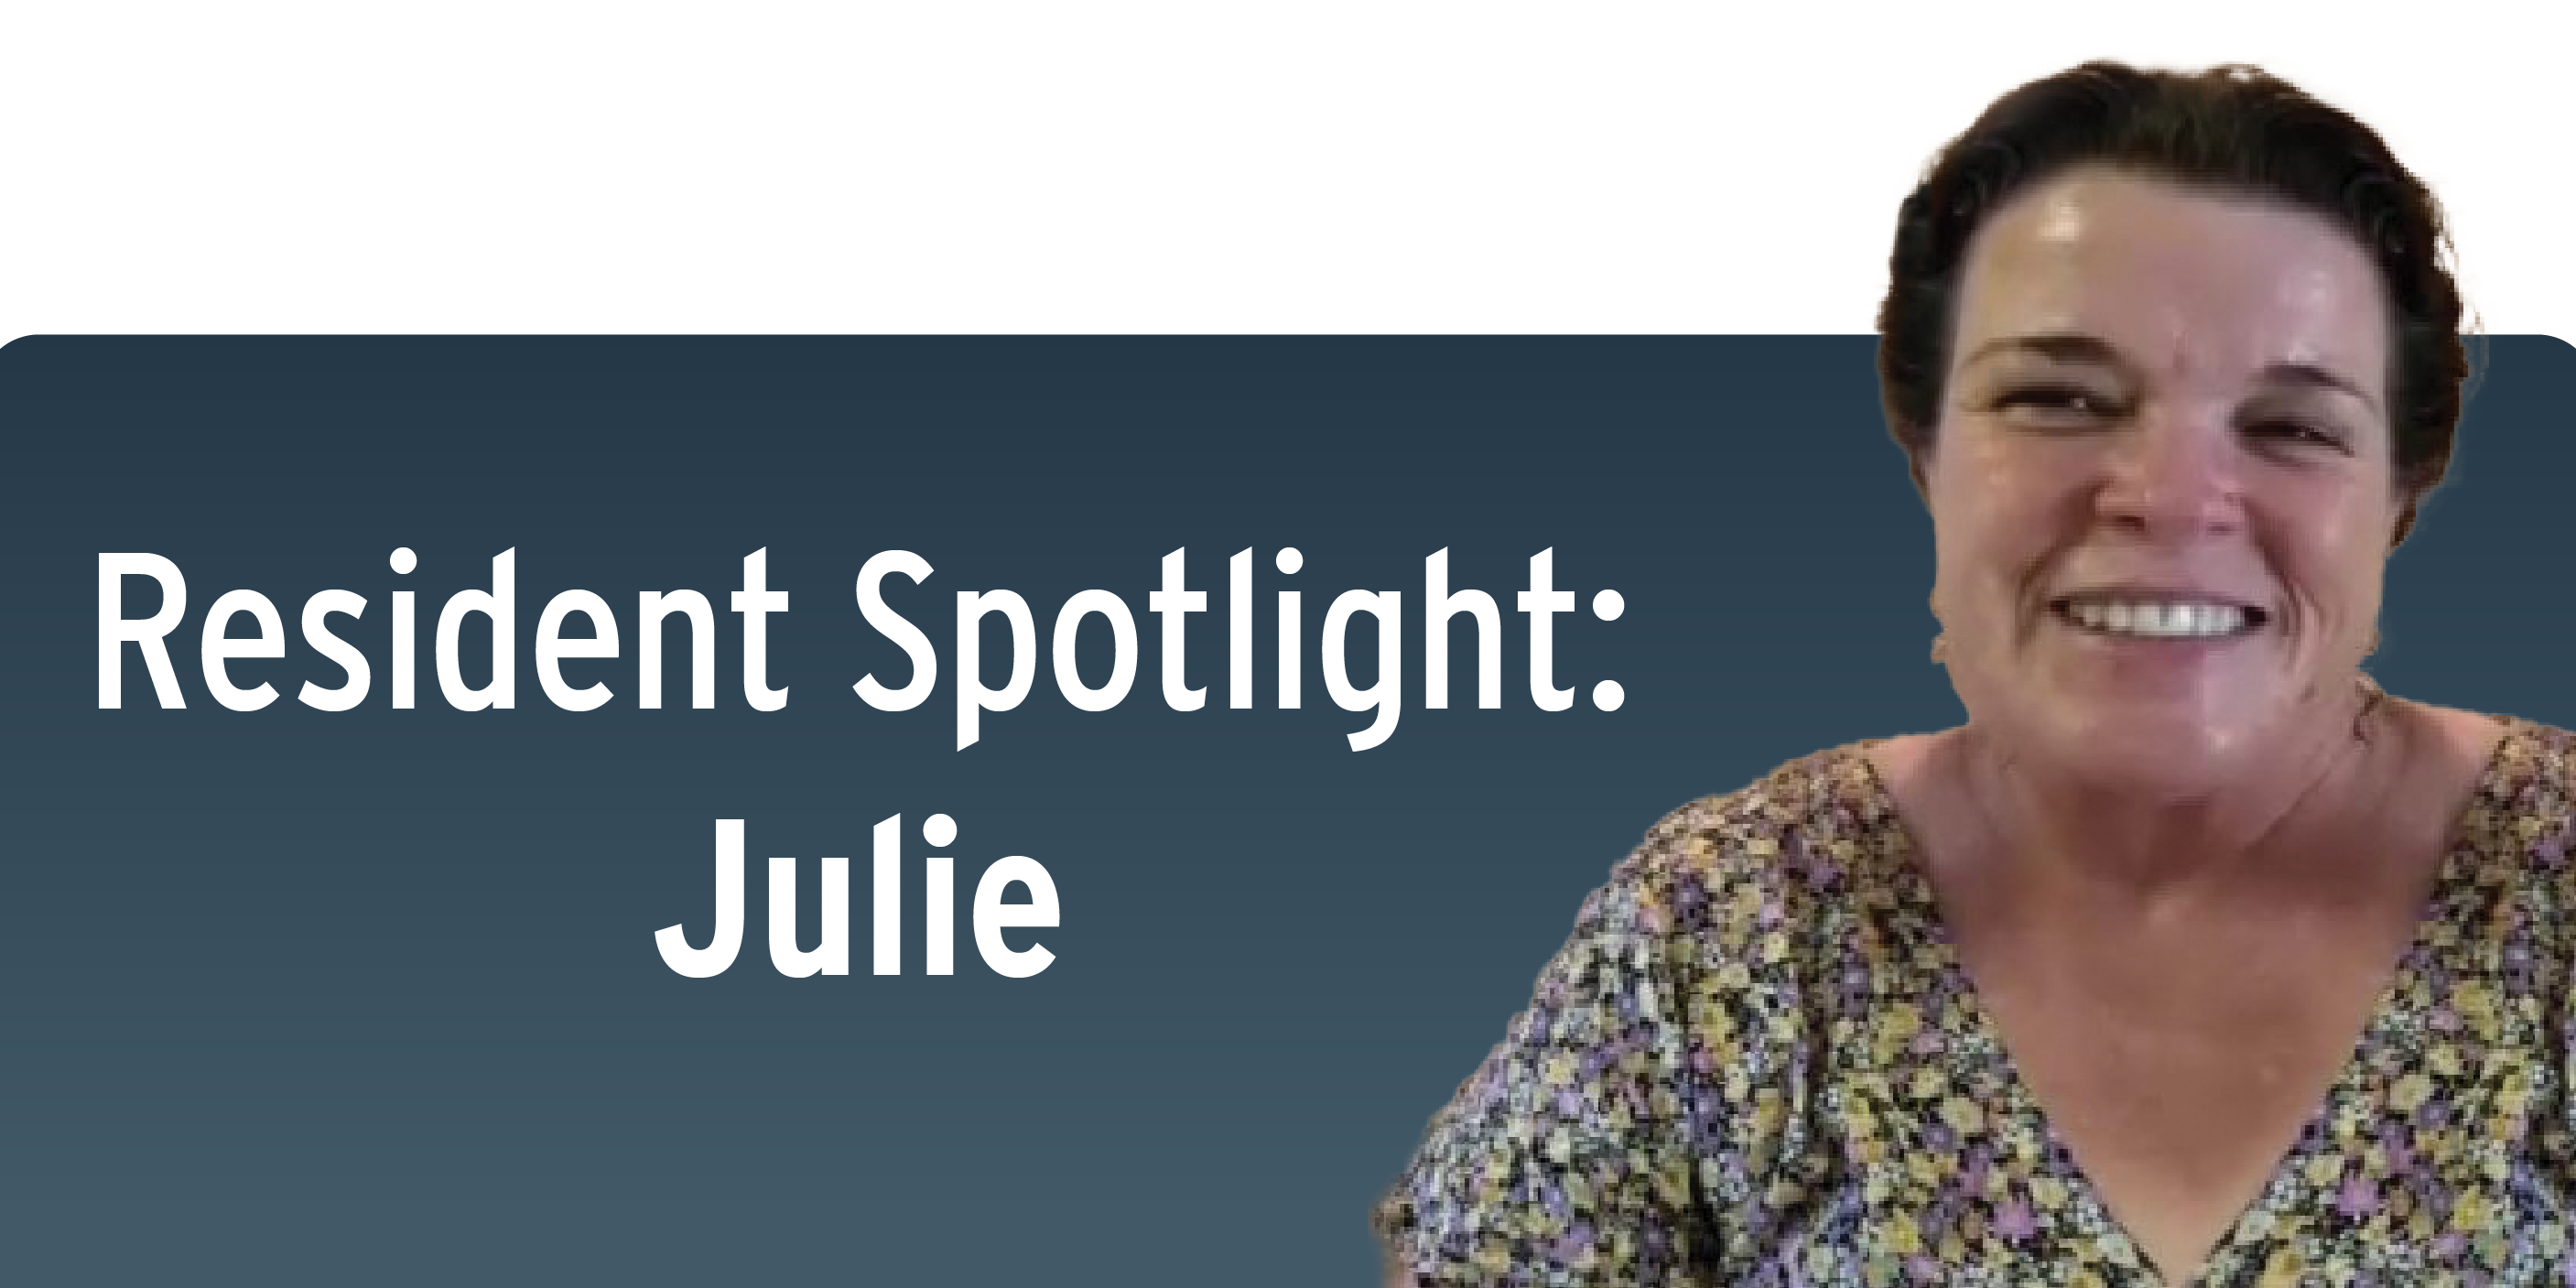 A photo of Julie with the title "Resident Spotlight: Julie"